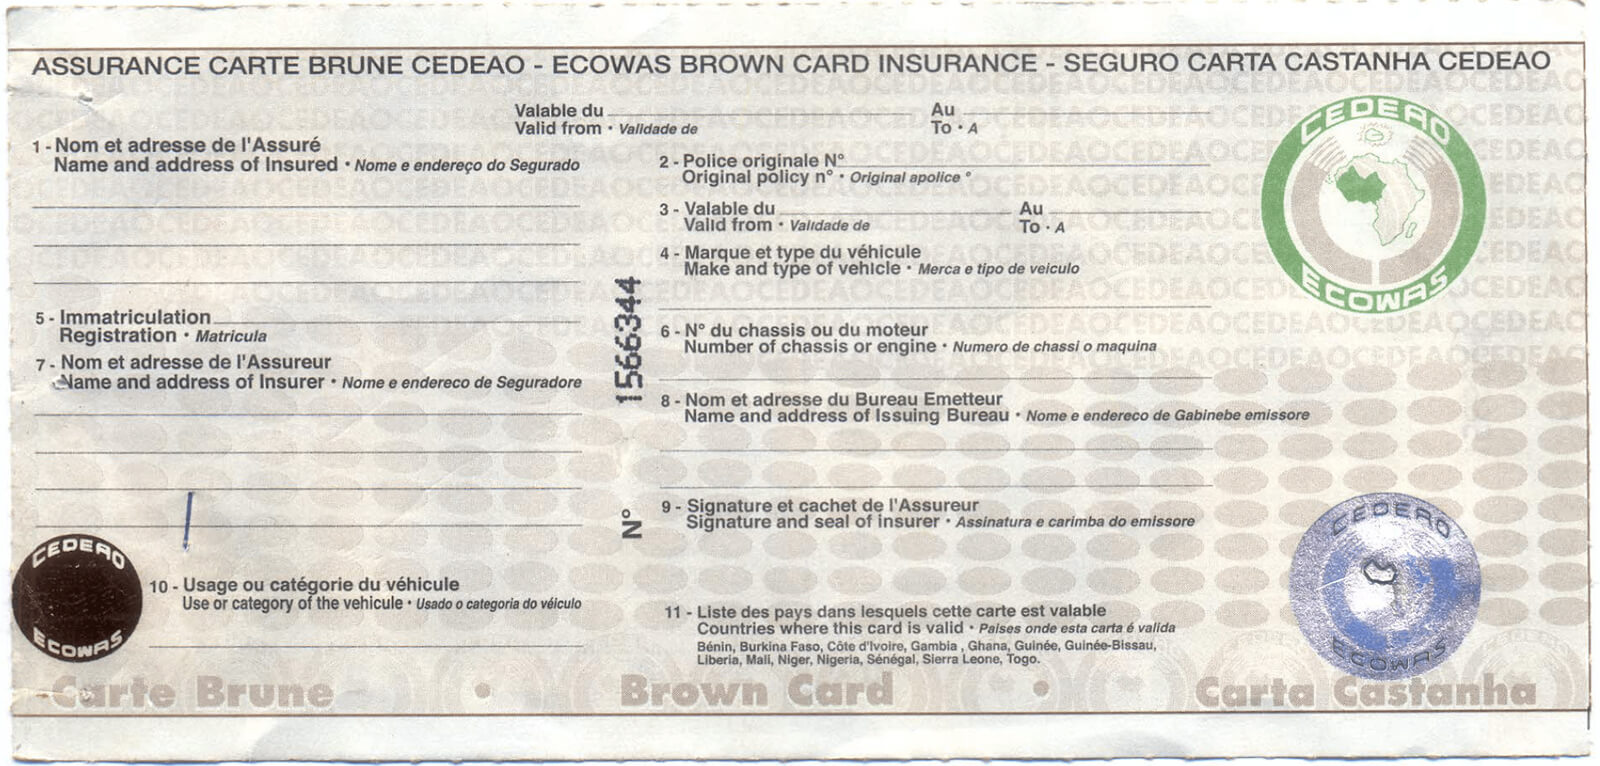 taking out brown card insurance for West Africa if you are overlanding in your own vehicle